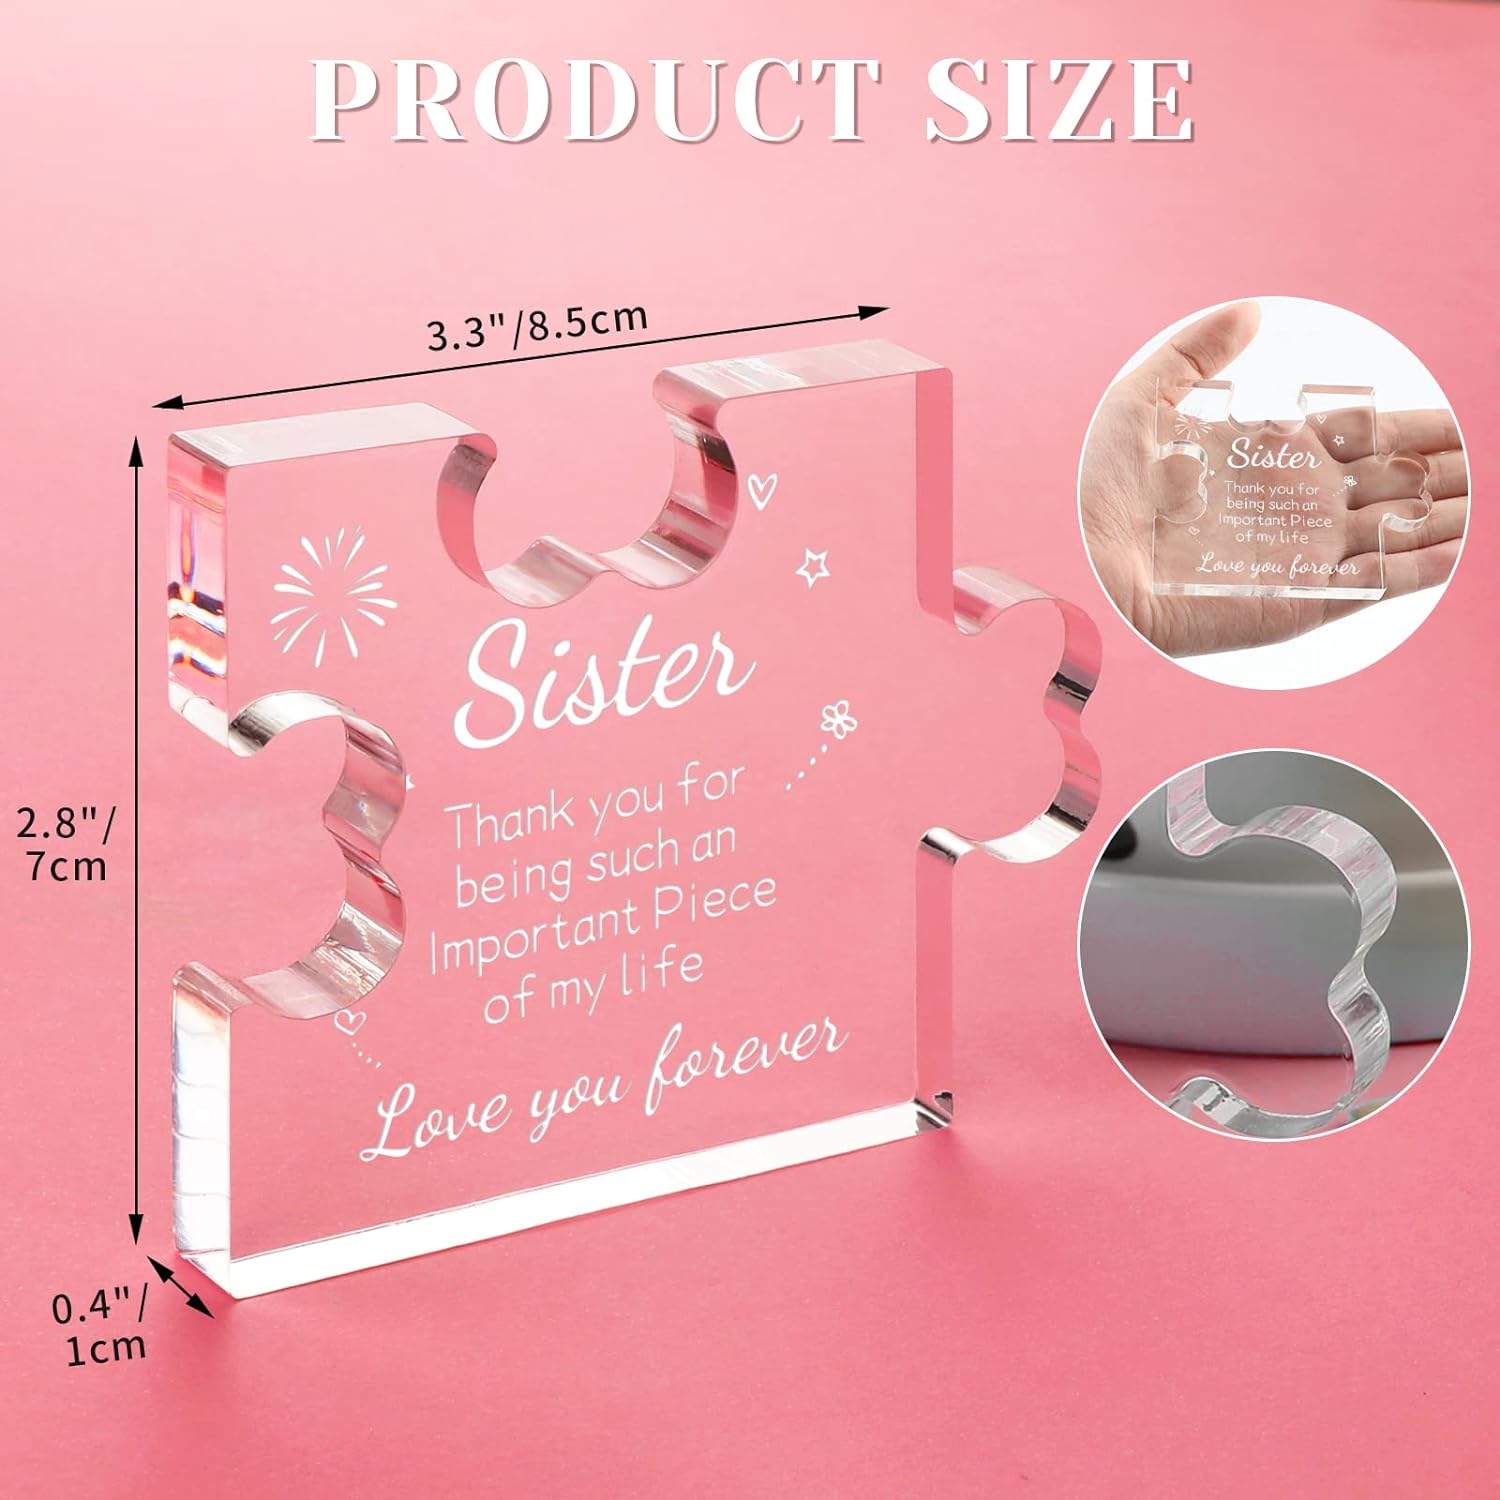 Funnli Sister Gifts from Sister Acrylic Puzzle Plaque - Sister Birthday Gift Ideas 3.35 x 2.76 Inch Desk Decorations - Gifts for Sister Birthday Christmas Wedding Gifts Card for Sister